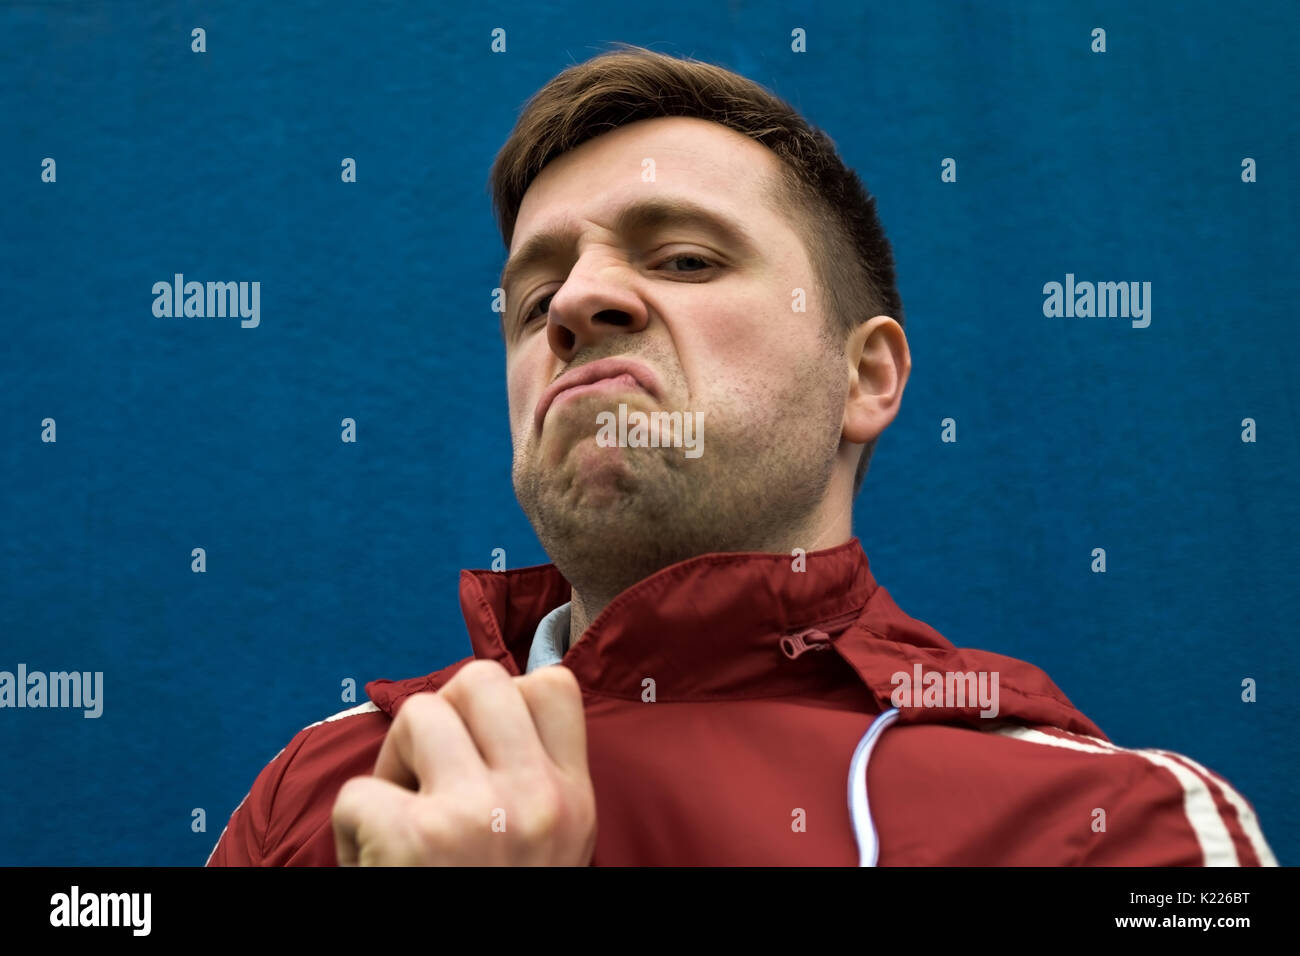 Portrait of caucasian young man with negative emotion on face Stock Photo